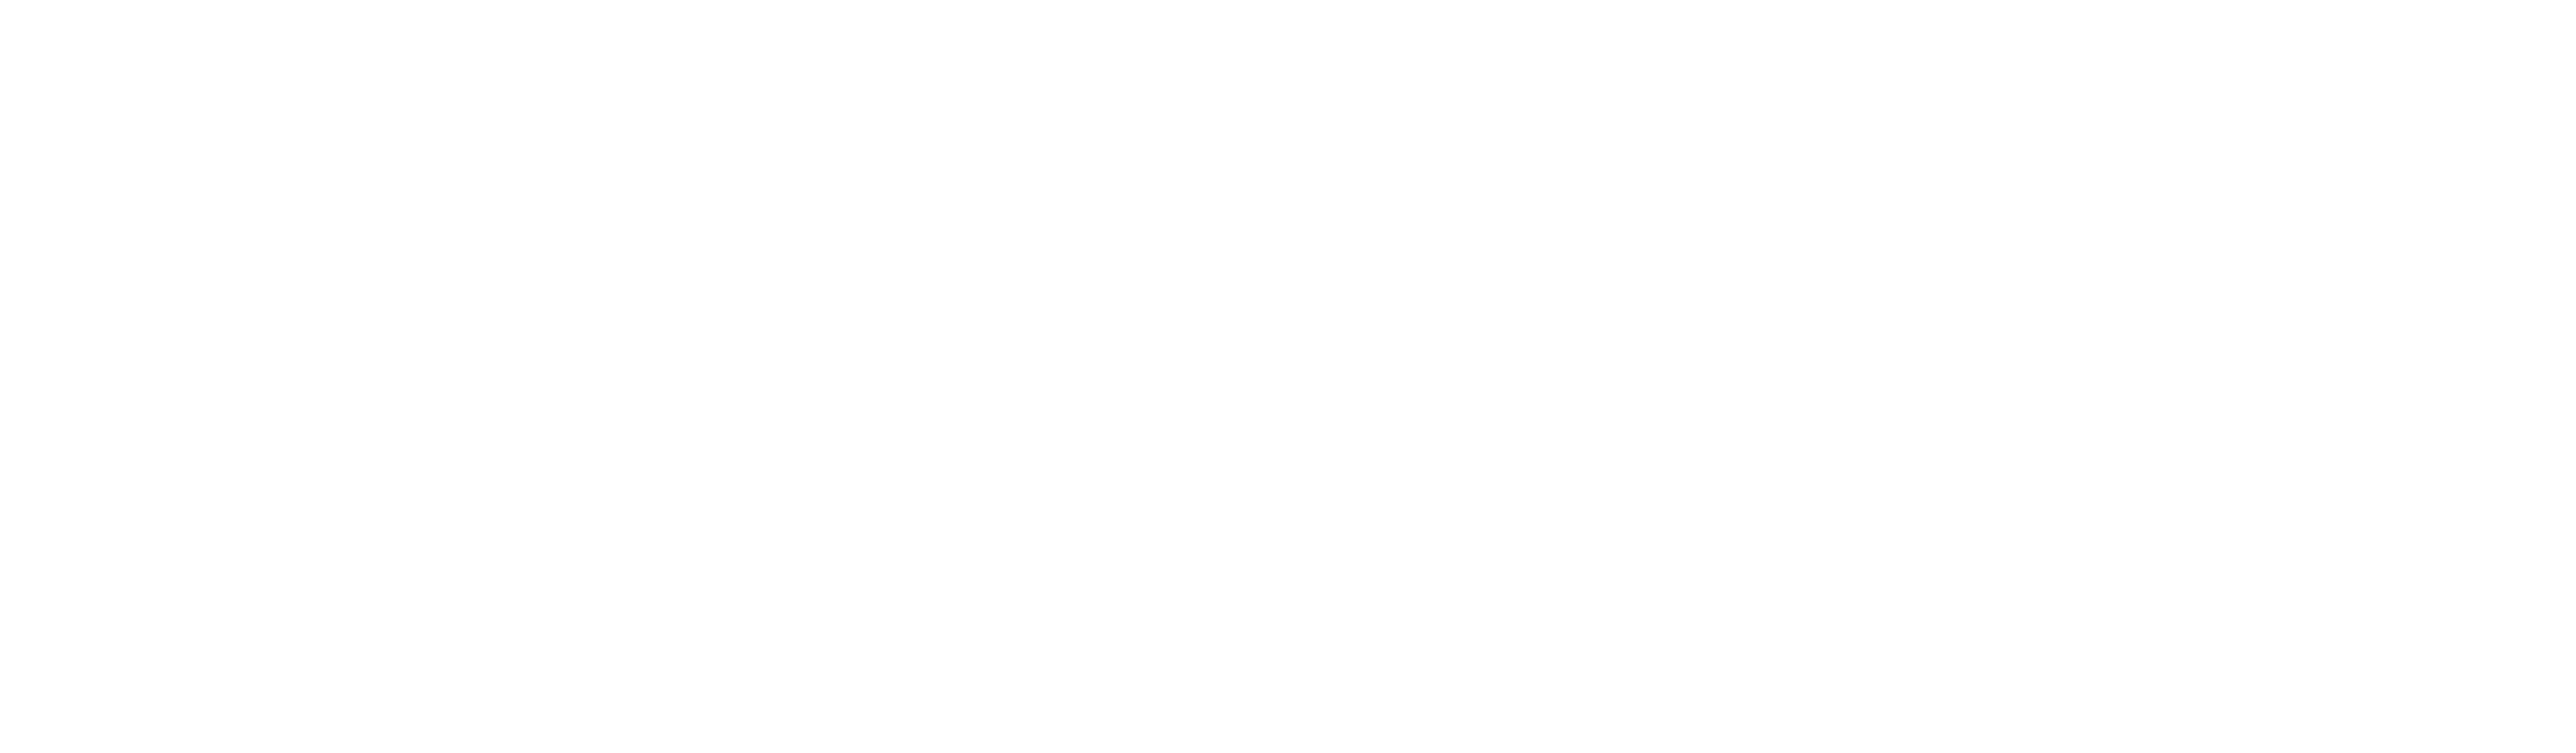 Old Trail Candle Company